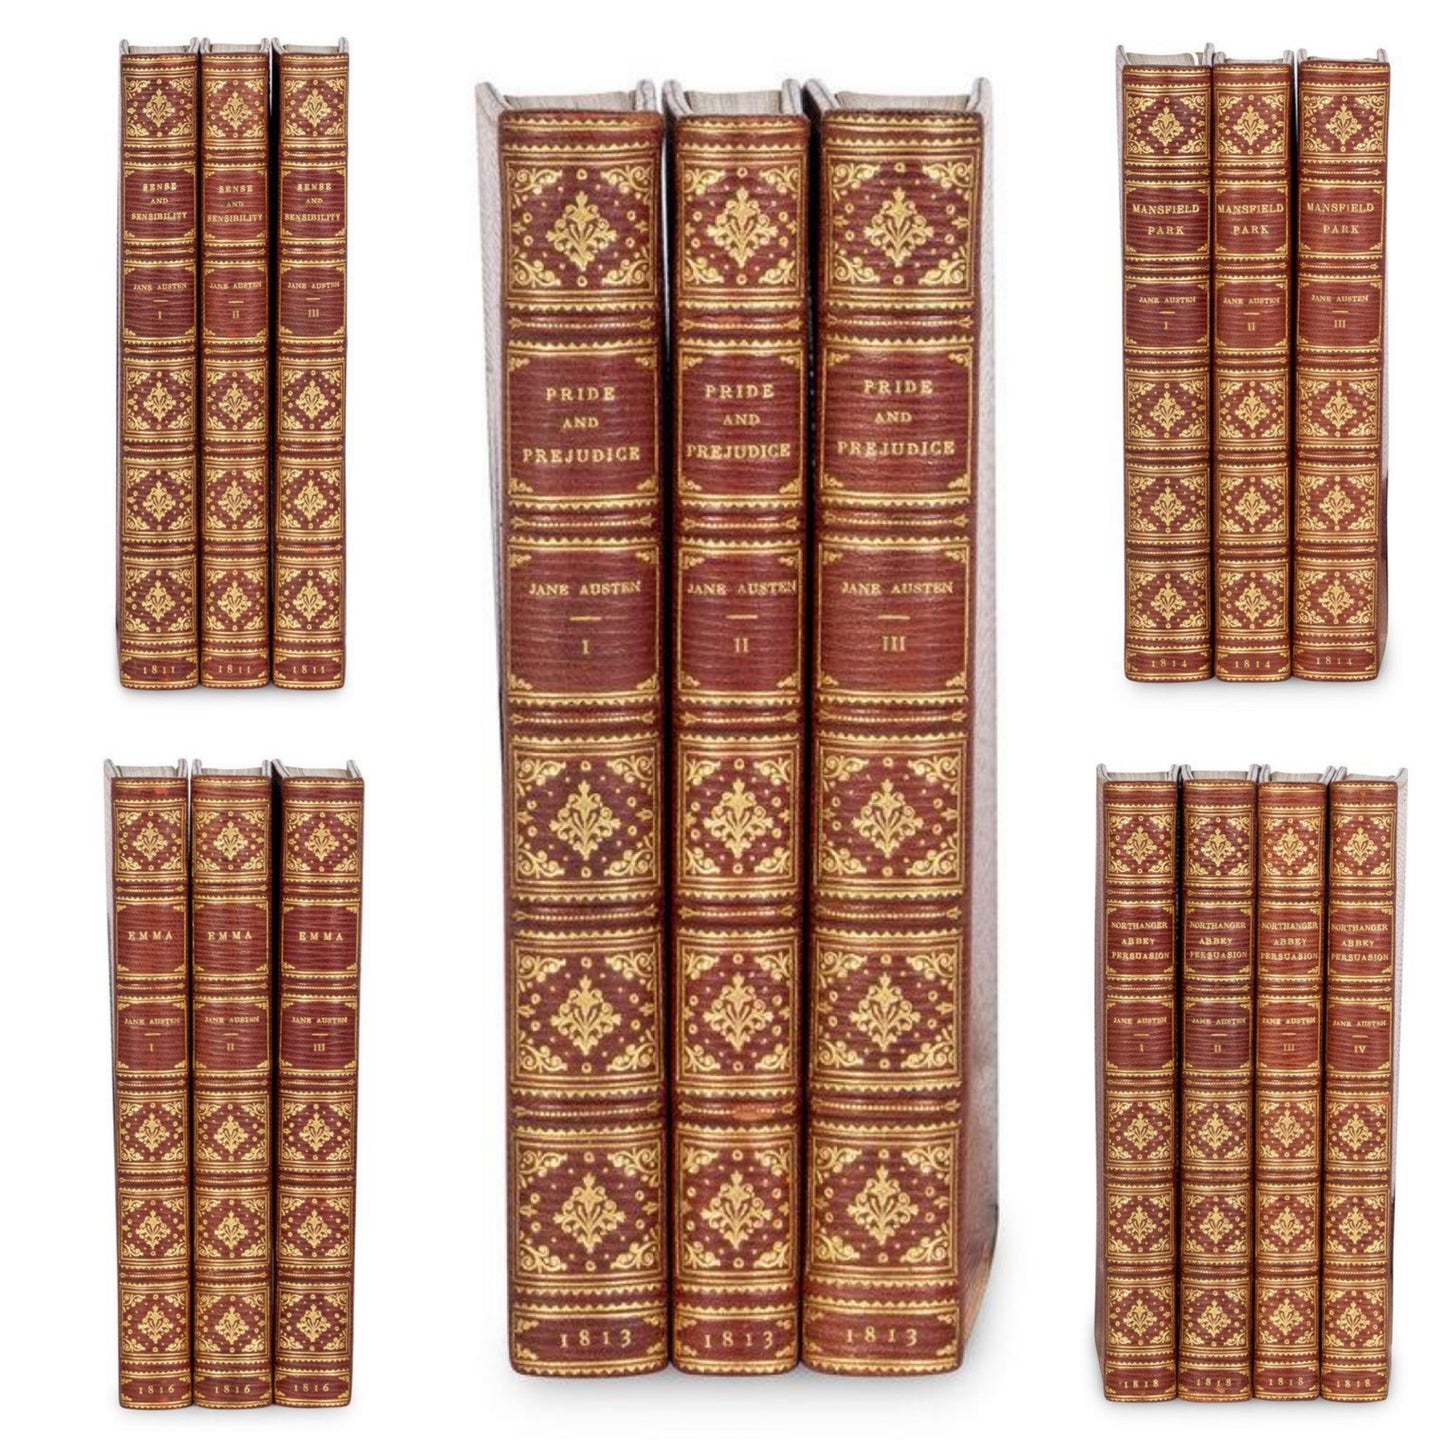 Austen, Jane - Her Complete Works, All First Editions - 1811, 1813, 1814, 1816, 1818